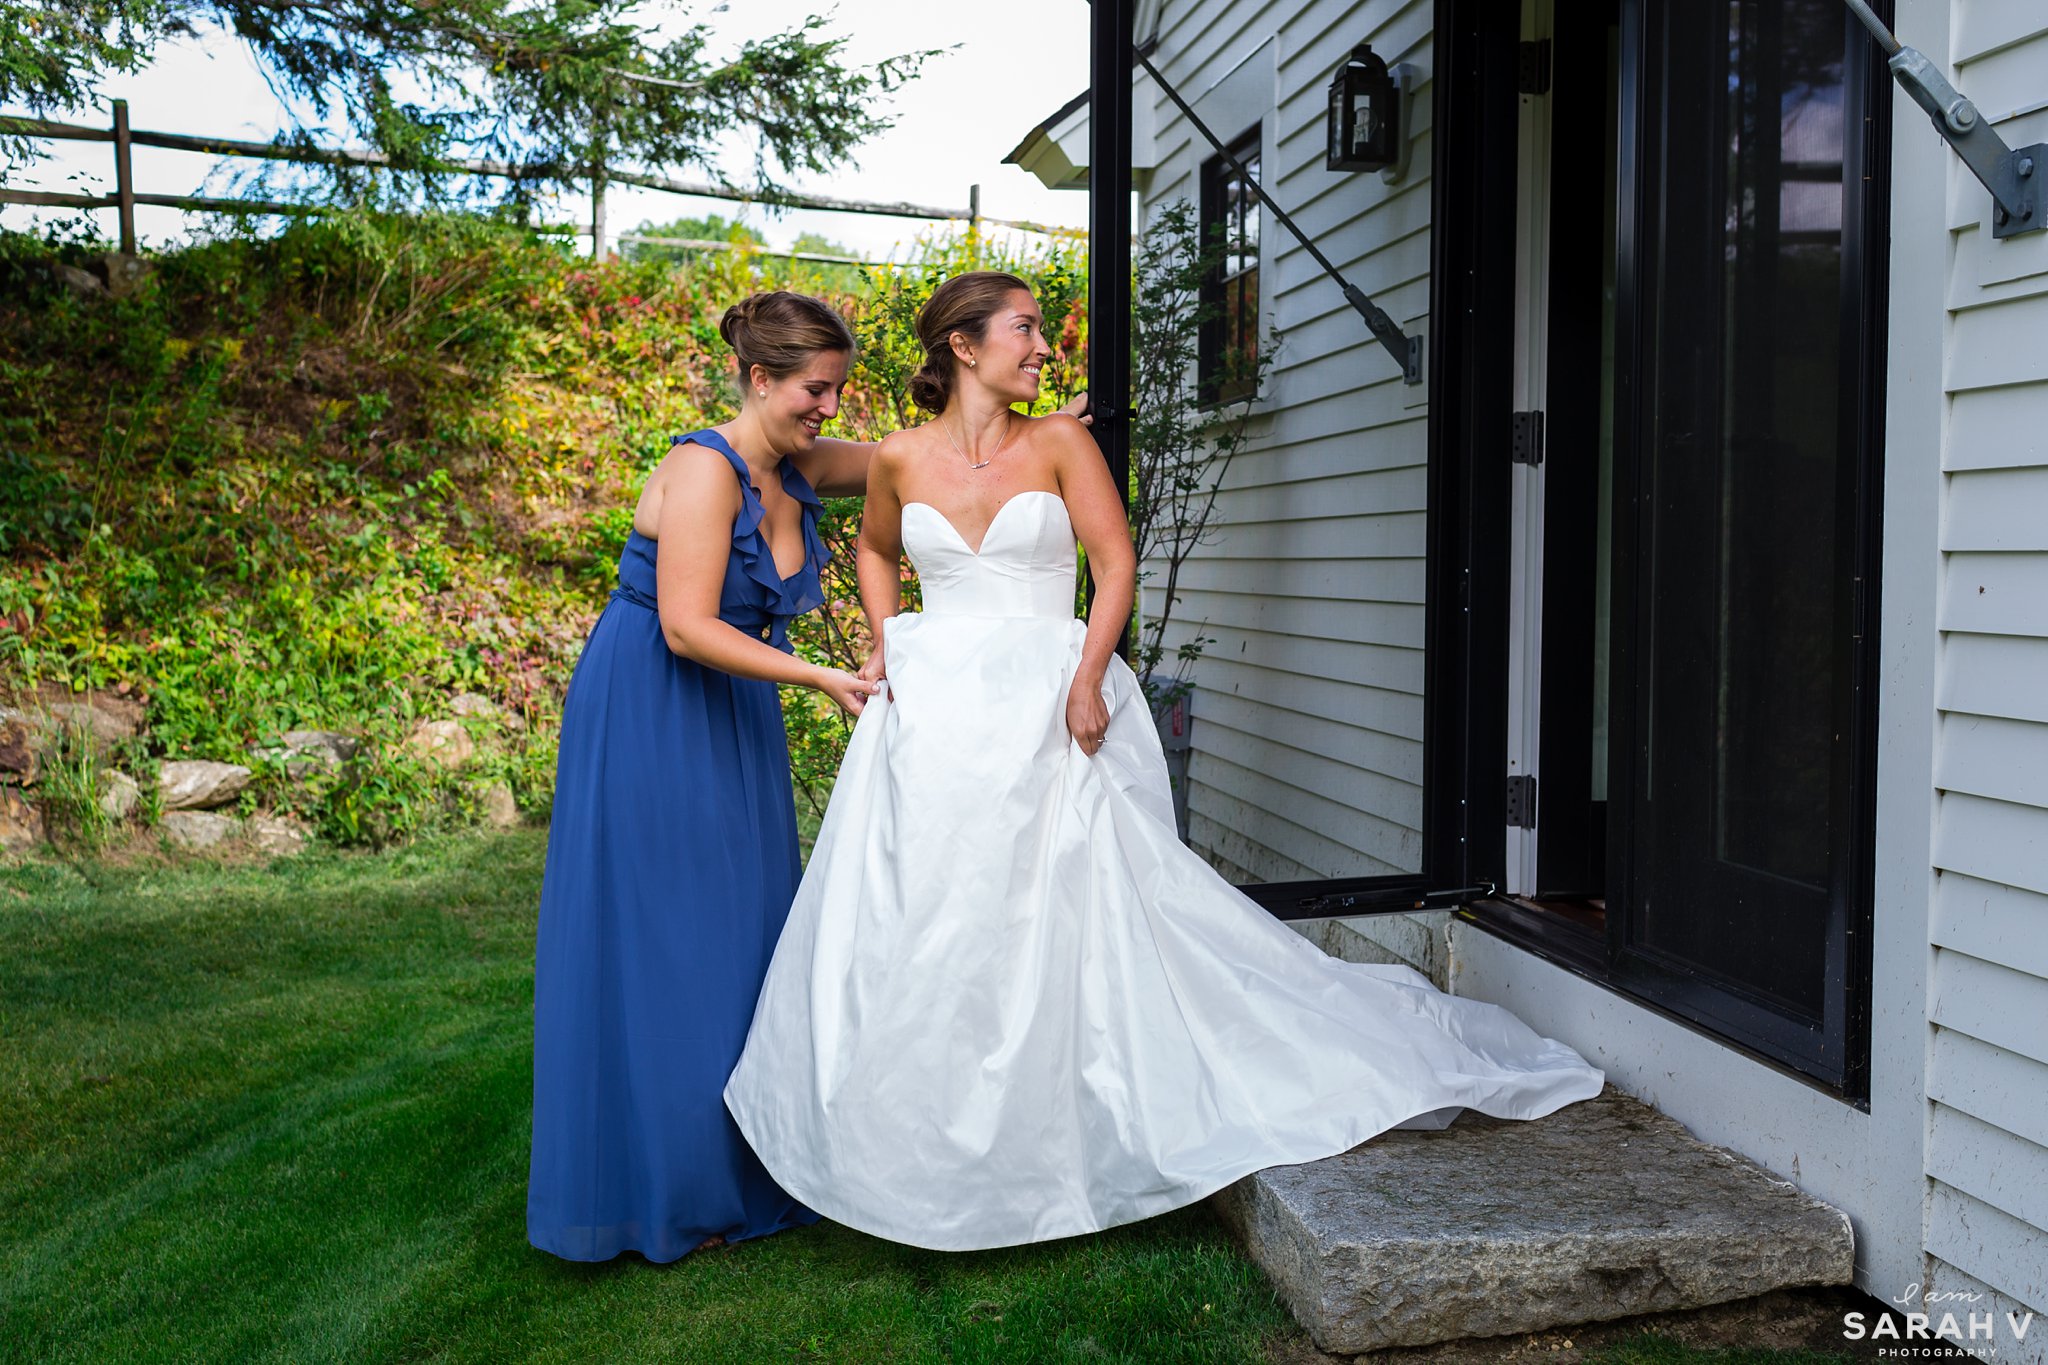 The bride heads to her first look with help from her sister